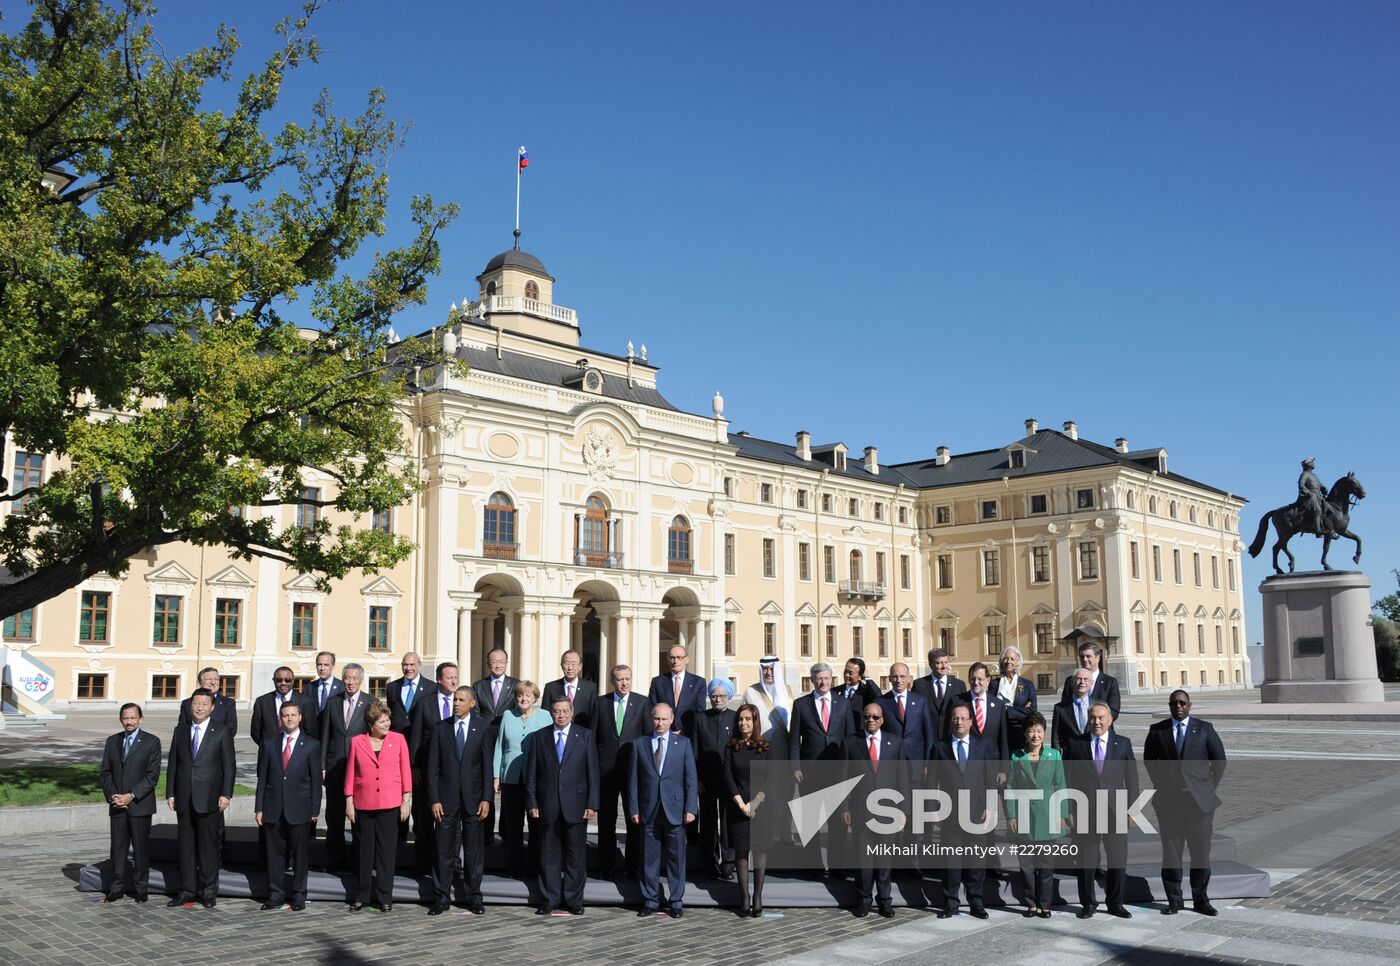 Family photo of G20 Summit participants